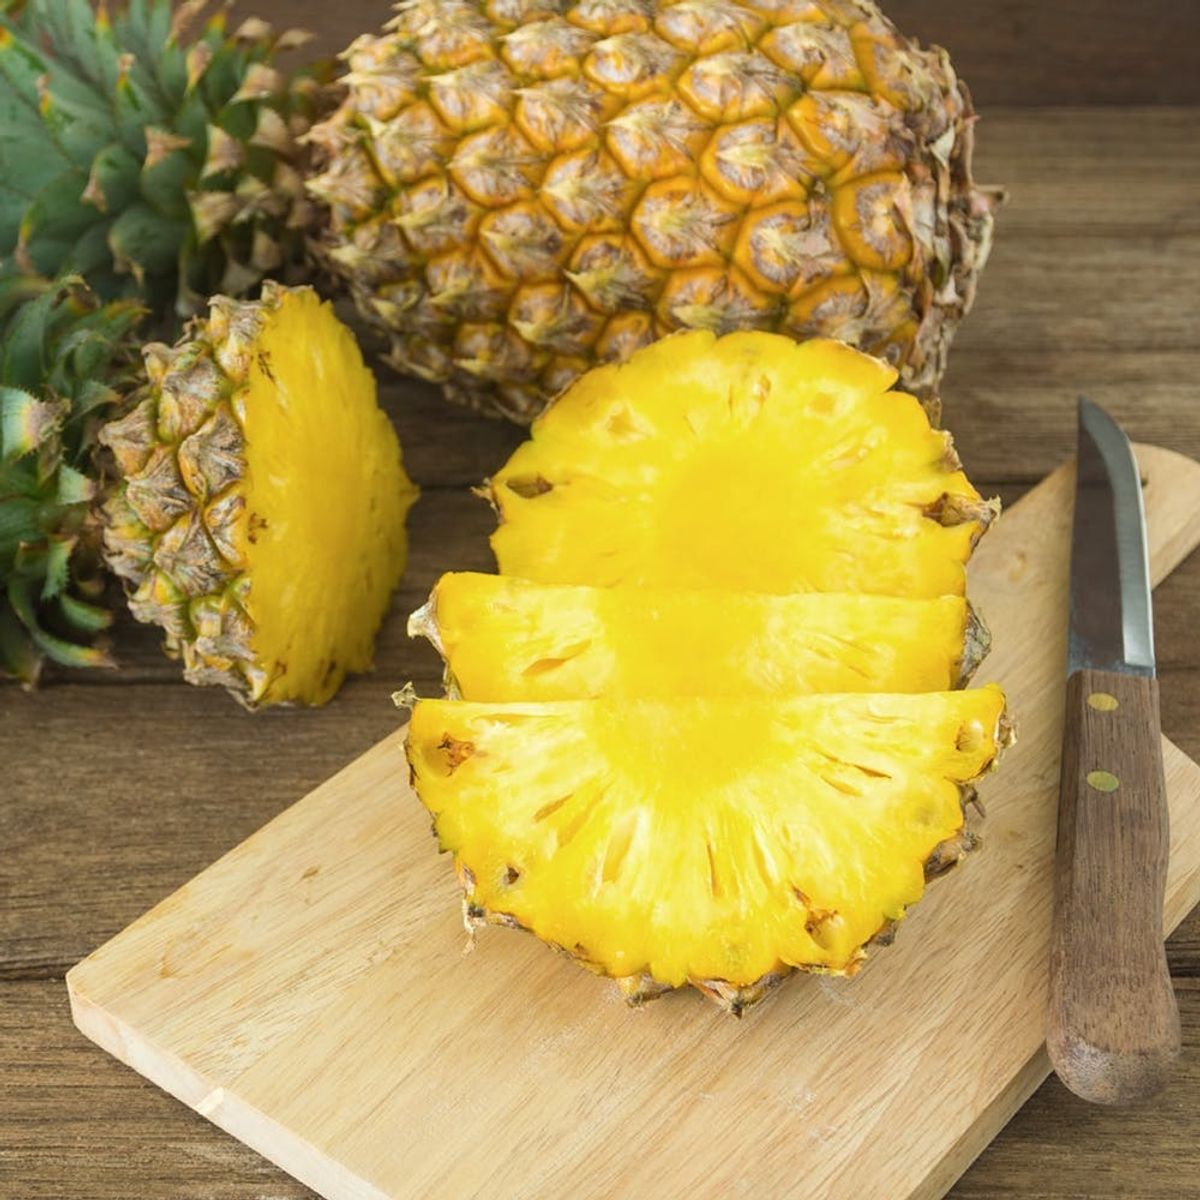 Does That Viral Pineapple Cutting Hack REALLY Work? We Put It to the Test